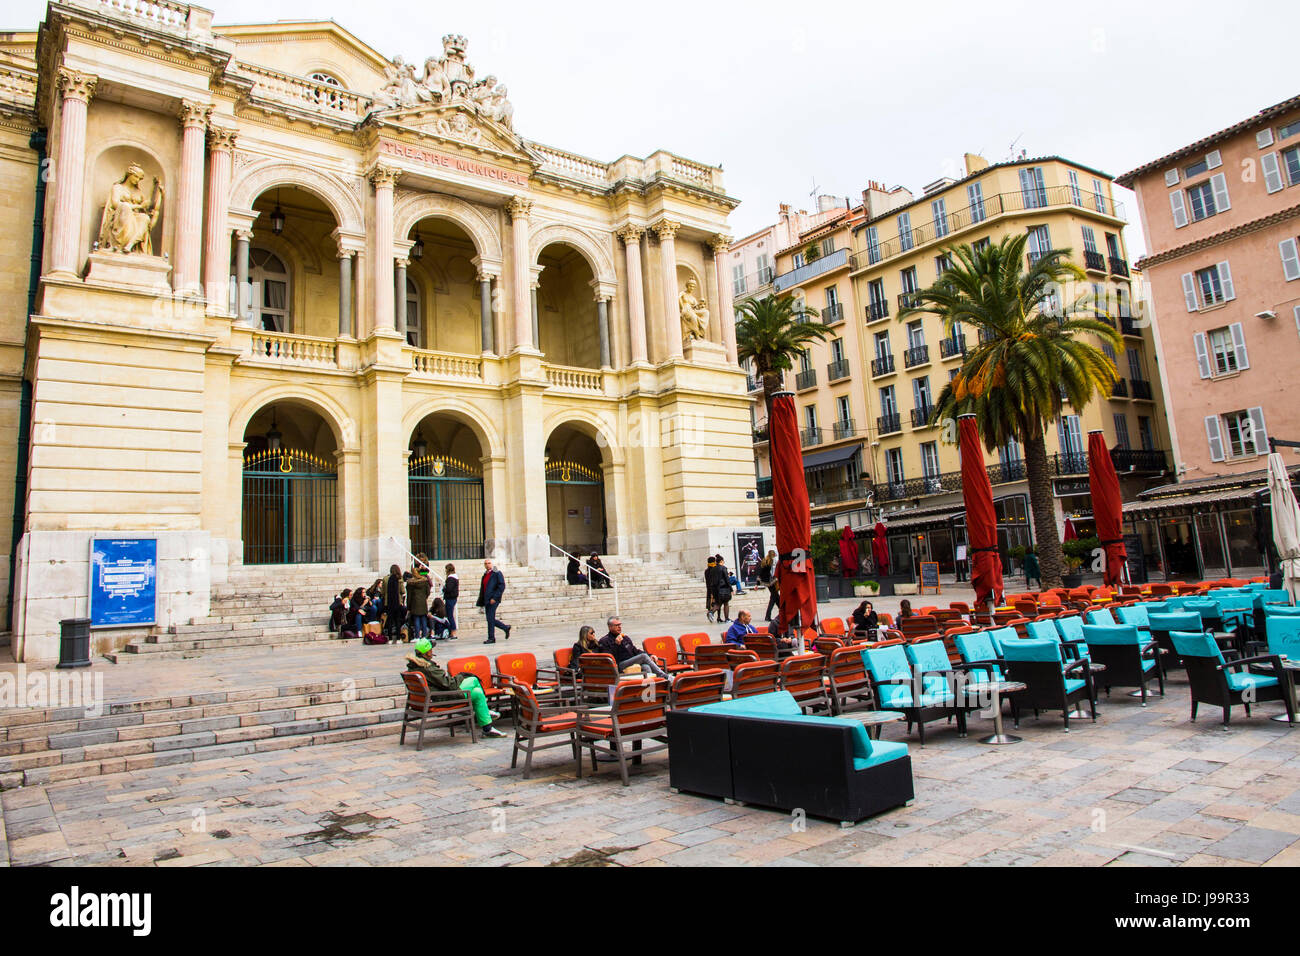 Overlooking Place Victor Hugo, Opera de Toulon is France's largest opera house outside of Paris.  It was designed by Charles Garnier and built in 1862. Stock Photo